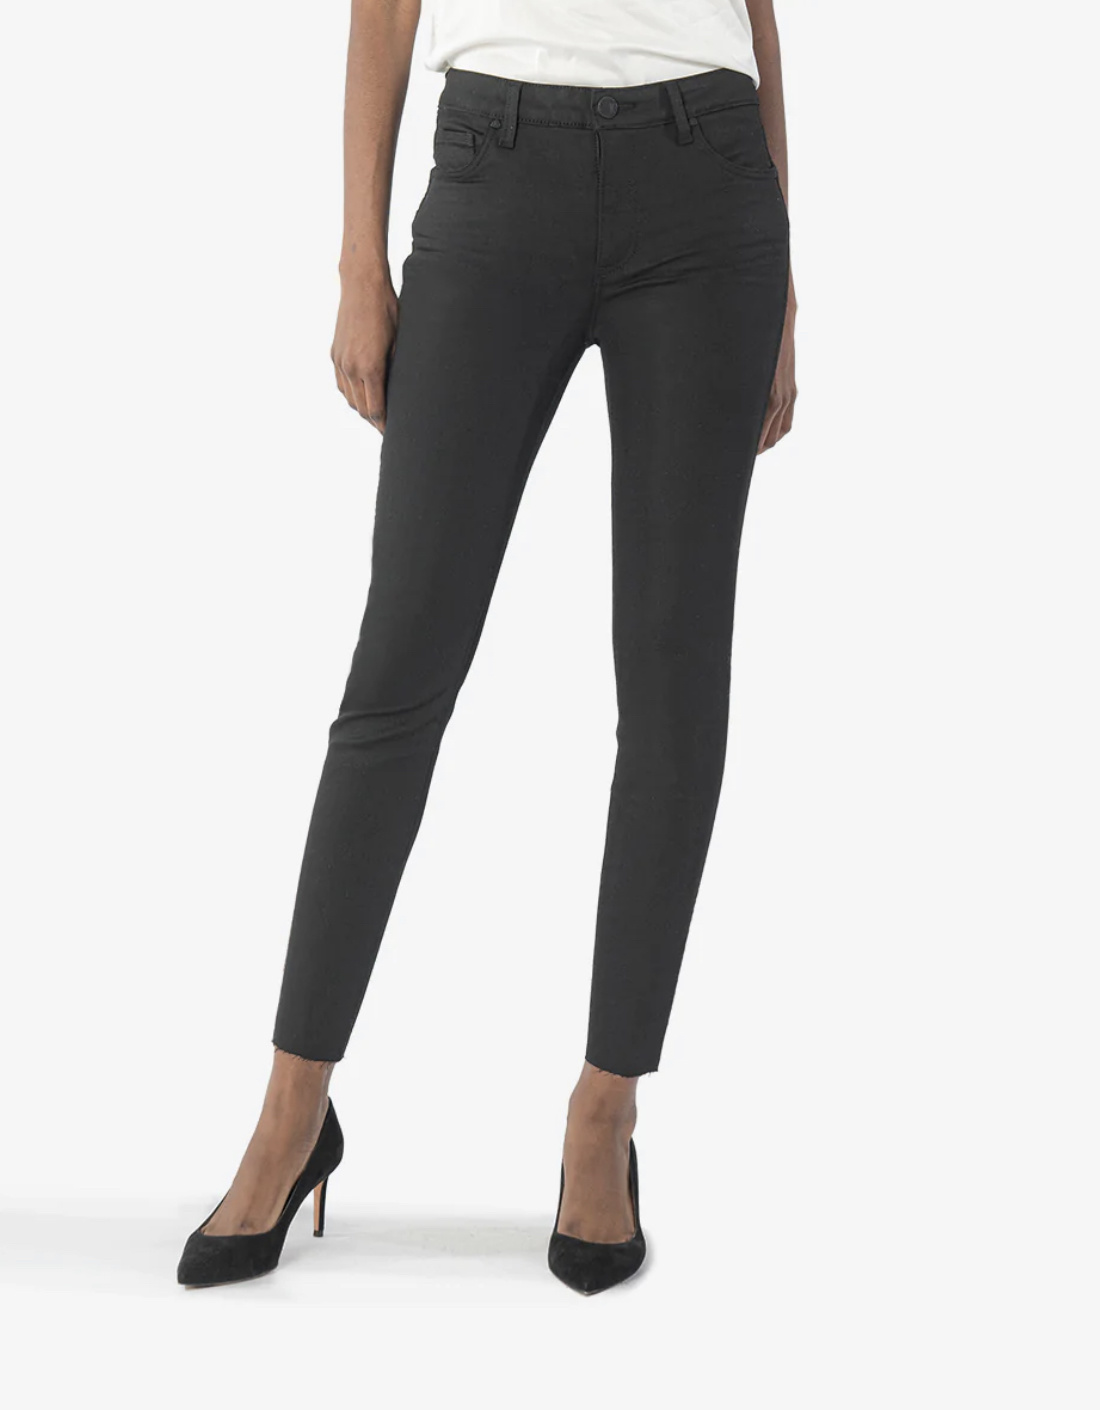 Kut KUT,Connie HR Fabab Ankle Skinny